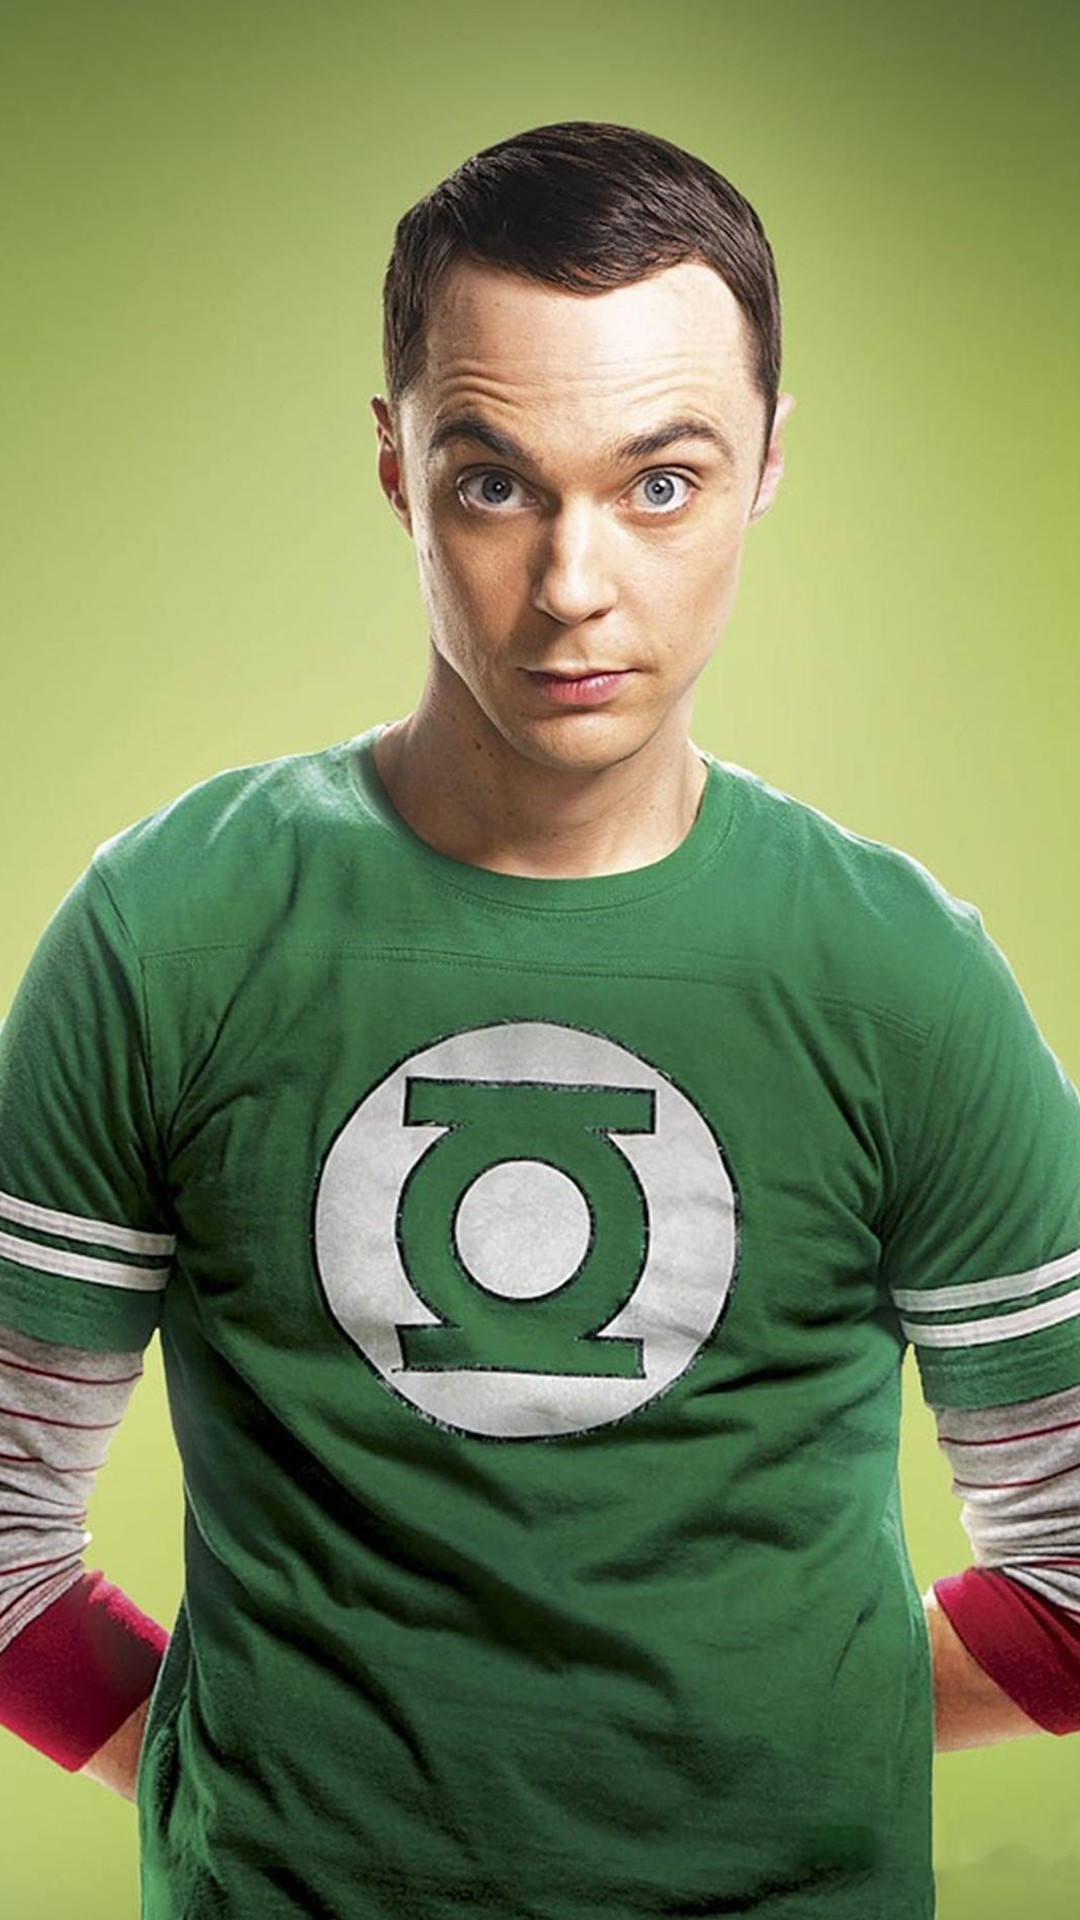 1080x1920 Sheldon Cooper The big bang theory Best htc one wallpapers